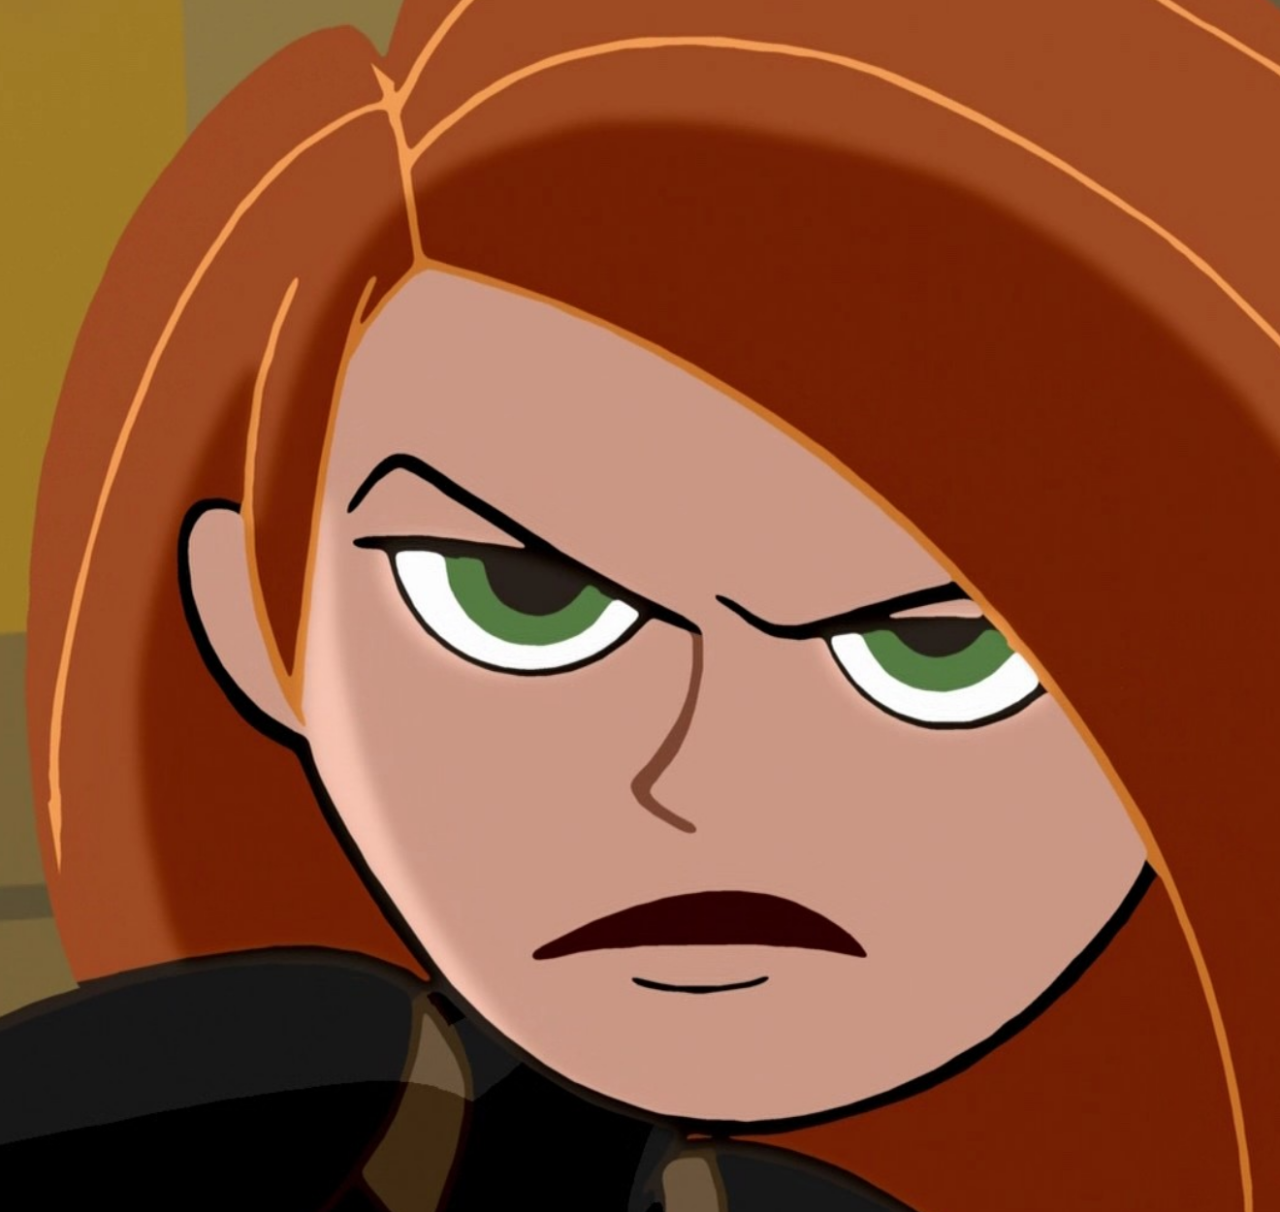 cheeralism: pan-pizza: Finishing up Kim Possible review script. What should I not